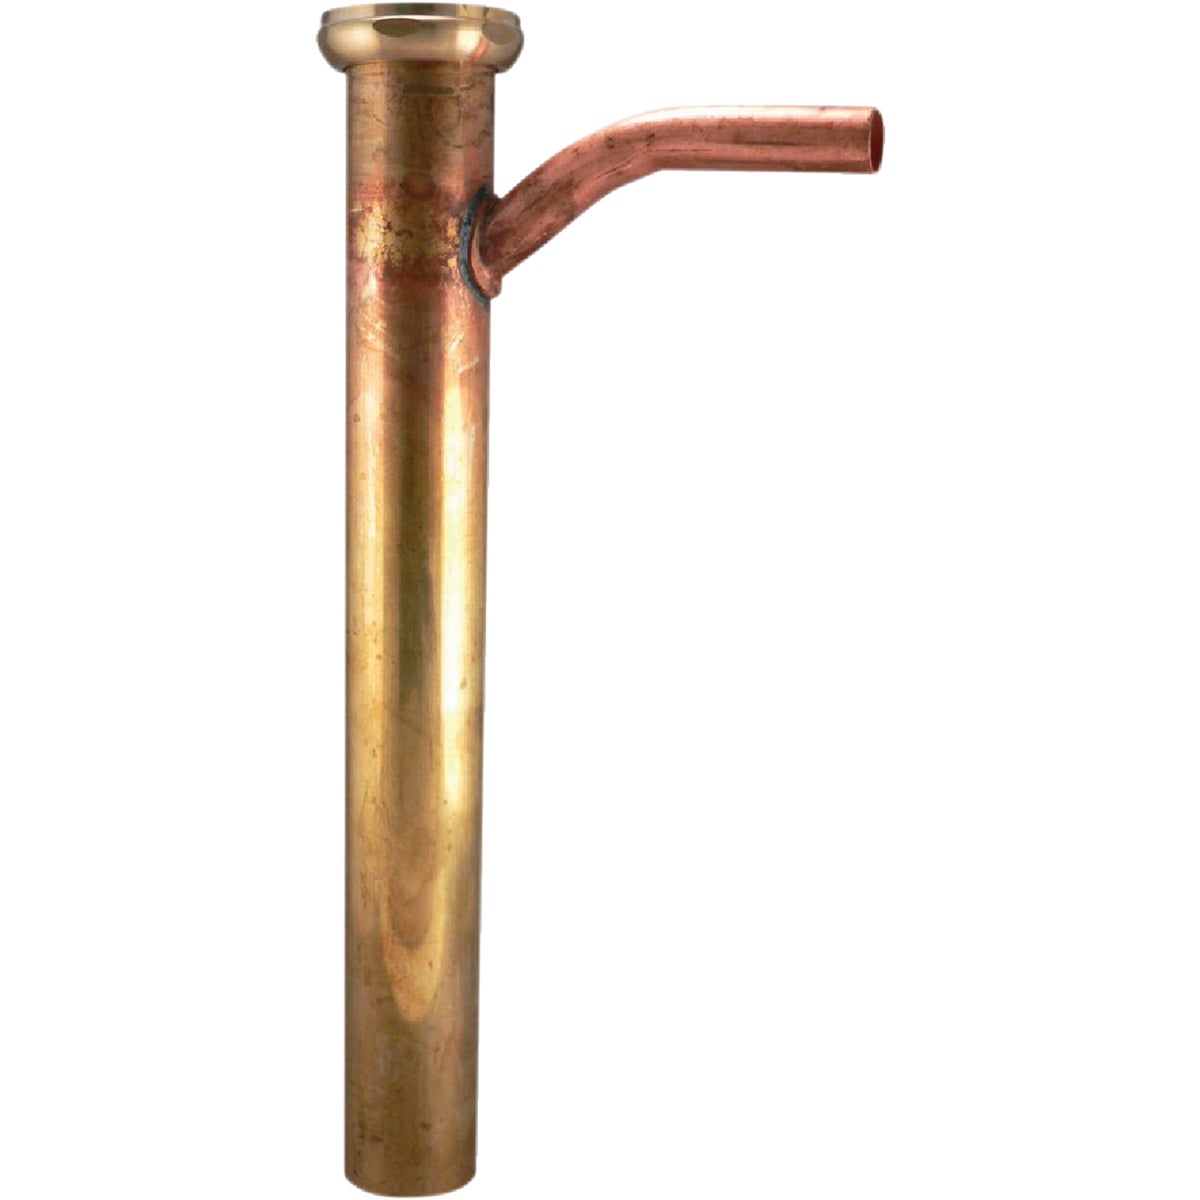 Item 466374, The longneck branch tailpiece is a direct connect. Brass.